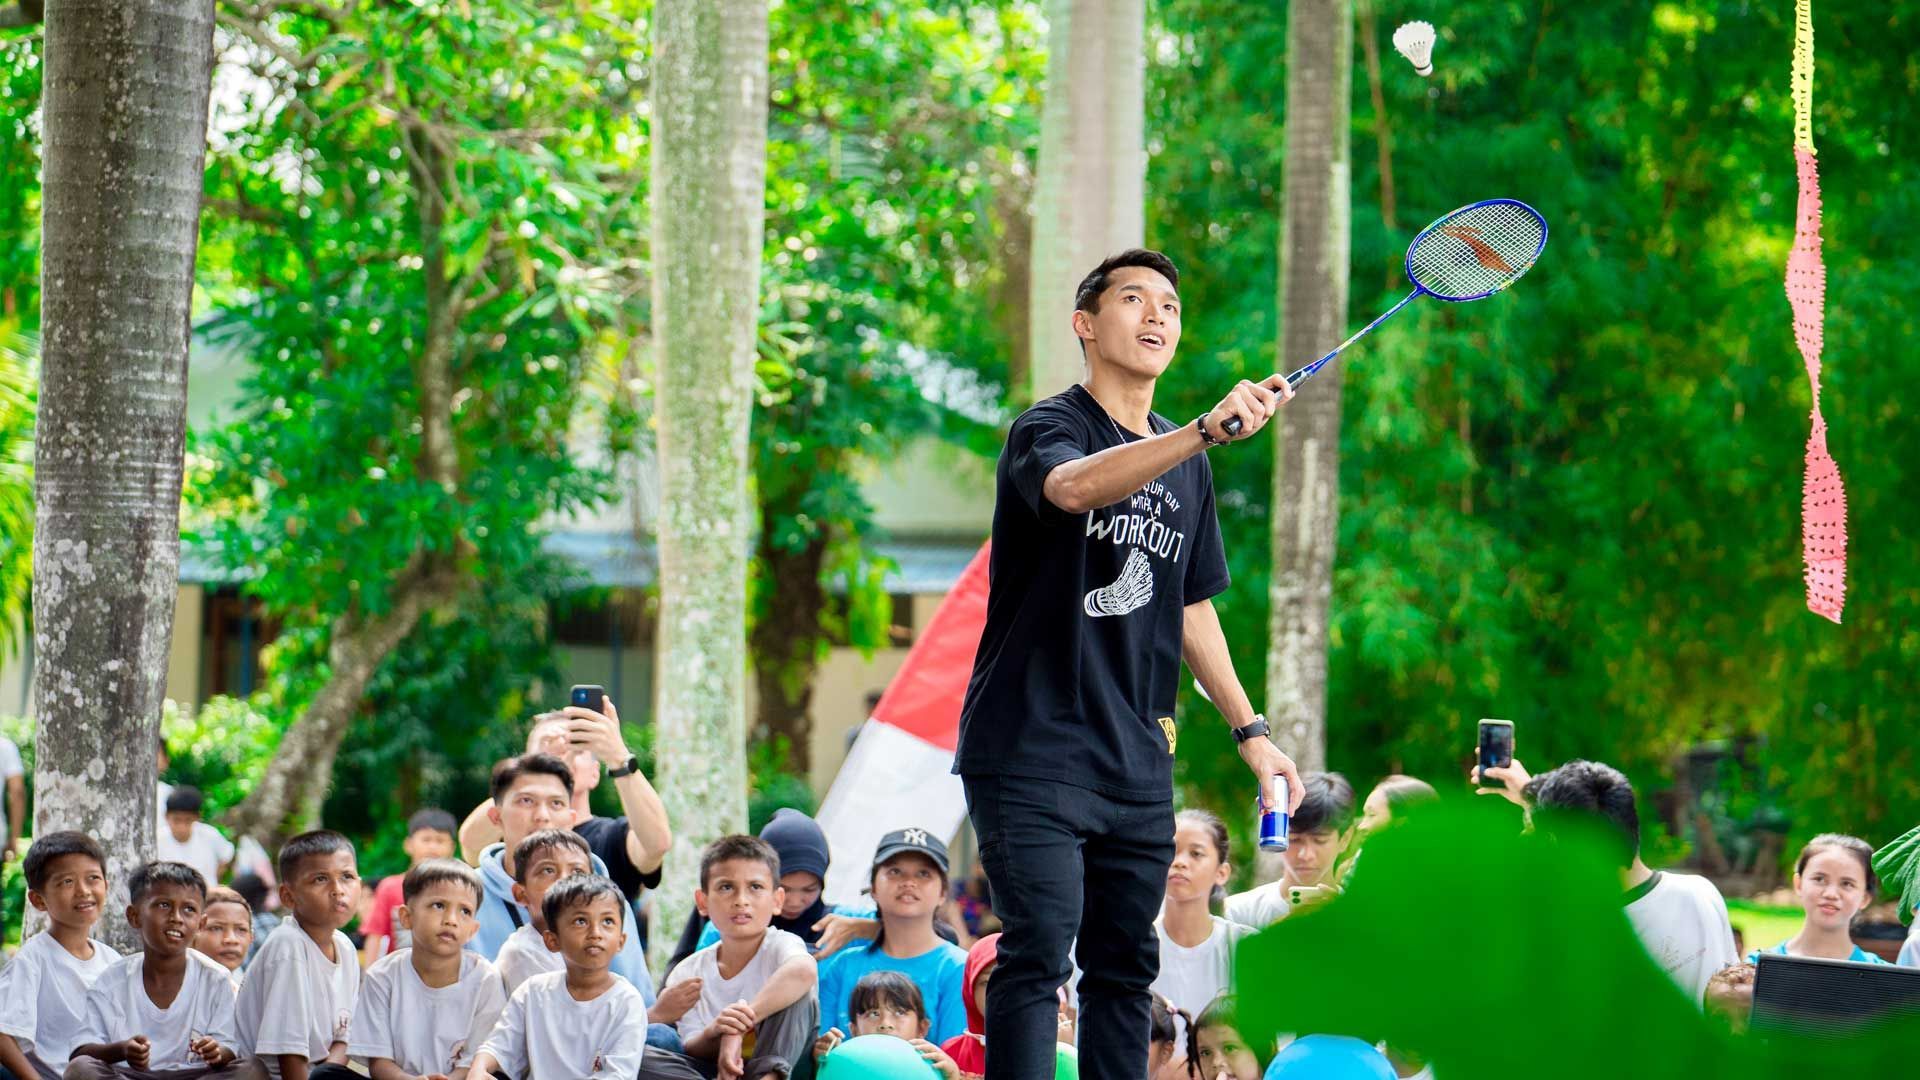 Jonatan Christie, also known as Jojo, joined ISCO children in playing badminton at DSJ